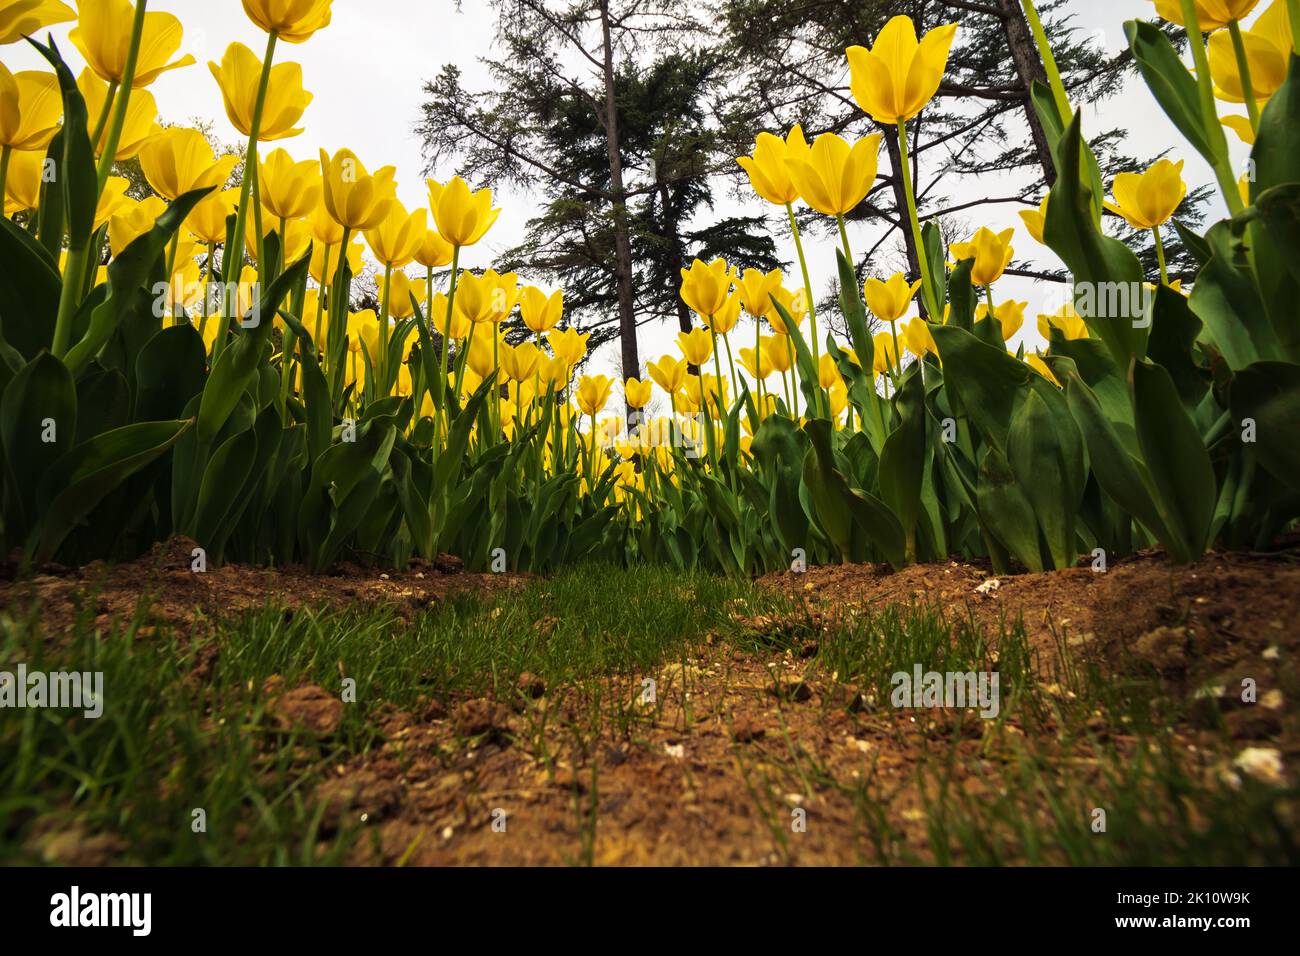 Yellow tulip bed in the public park. Tulips from below in wide angle view. Spring blossom concept. Stock Photo